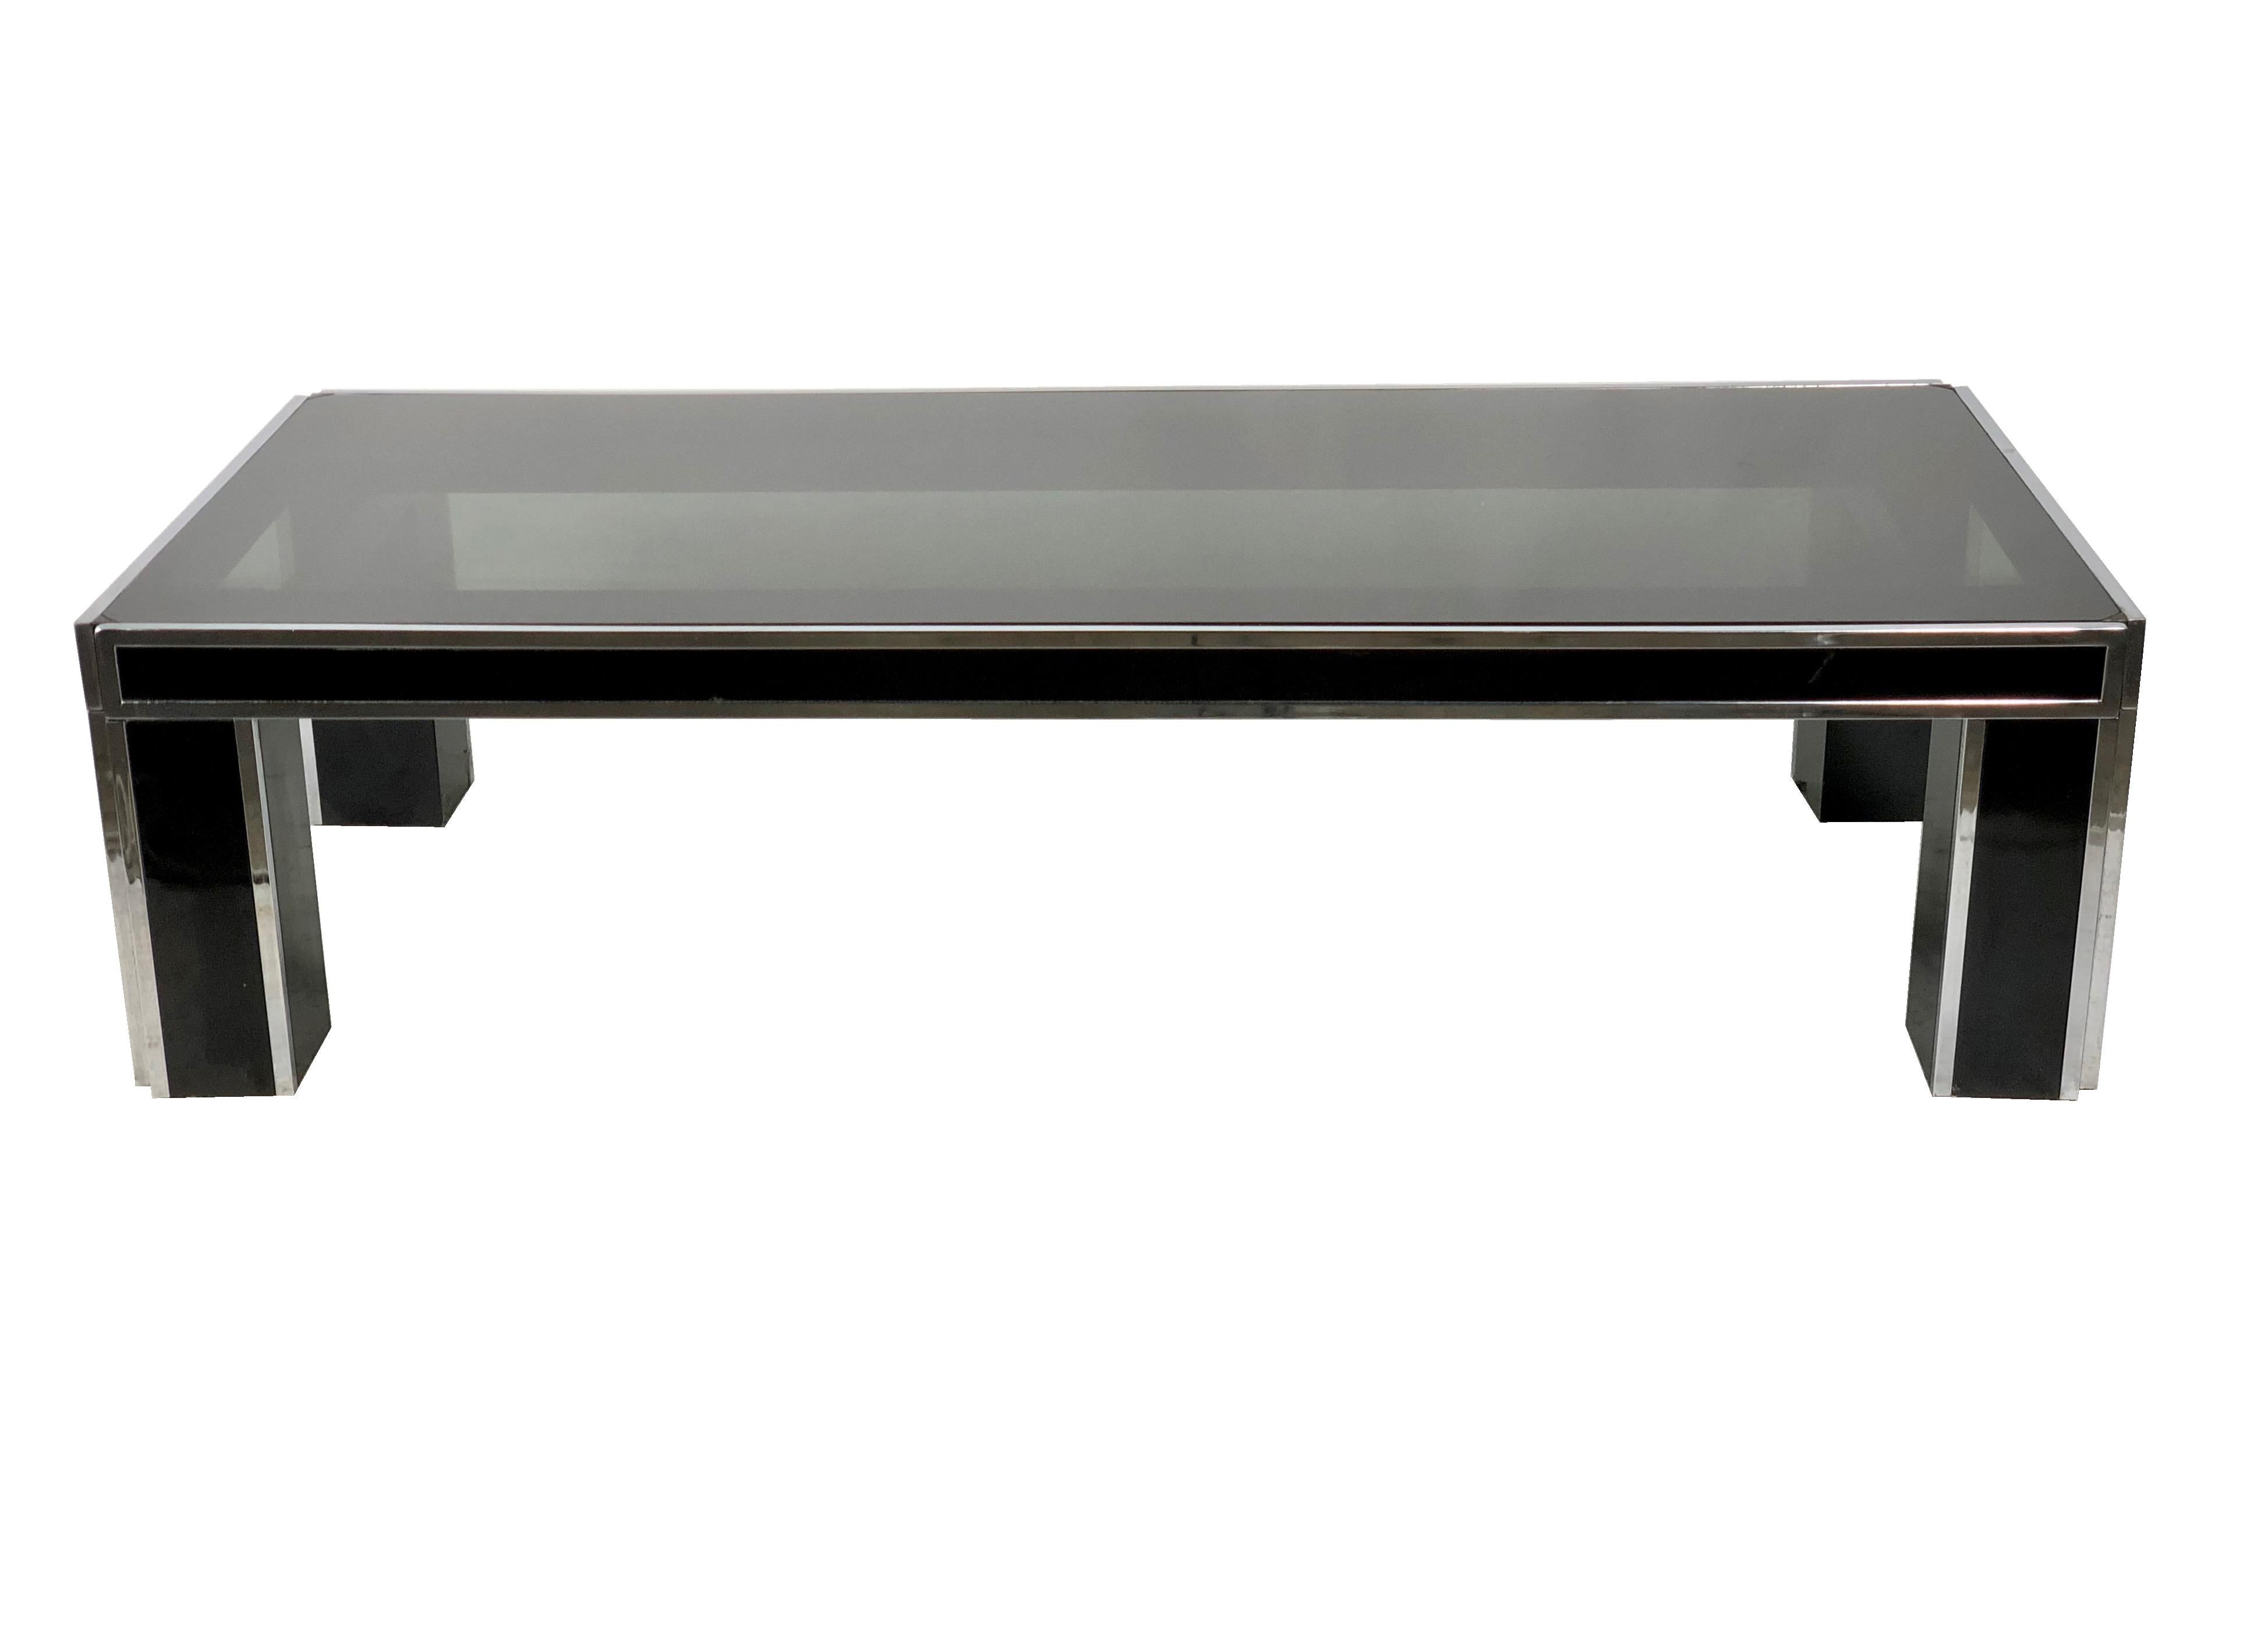 Rectangular coffee table in Romeo Rega style made of chrome coated in black and smoked glass, Italy, circa 1970.